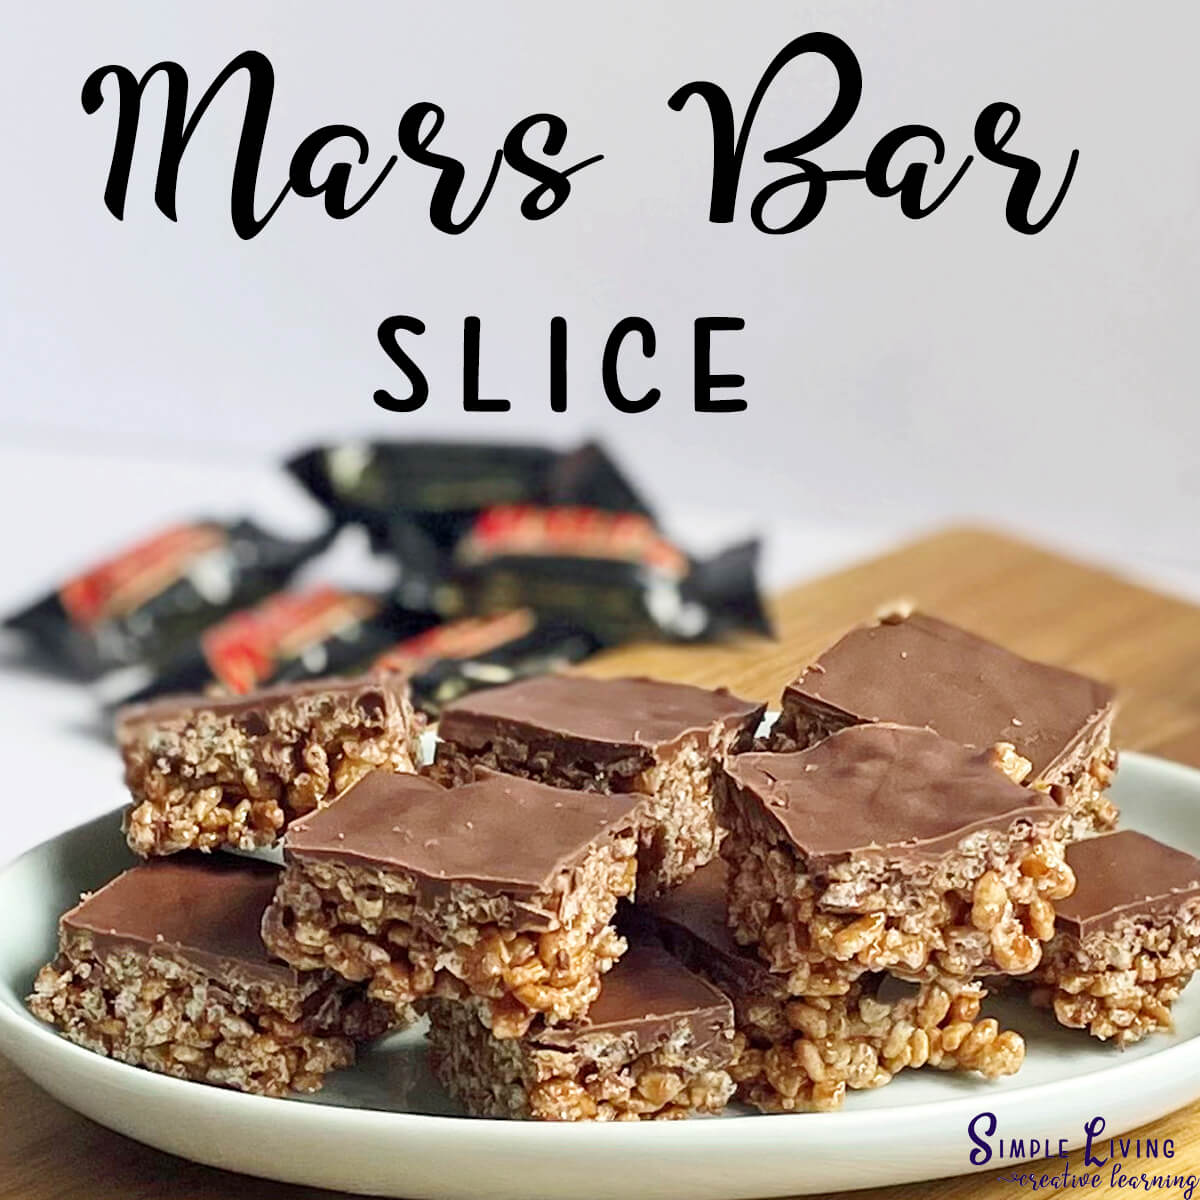 Mars Bar Slice on a plate with Mars Bars in background